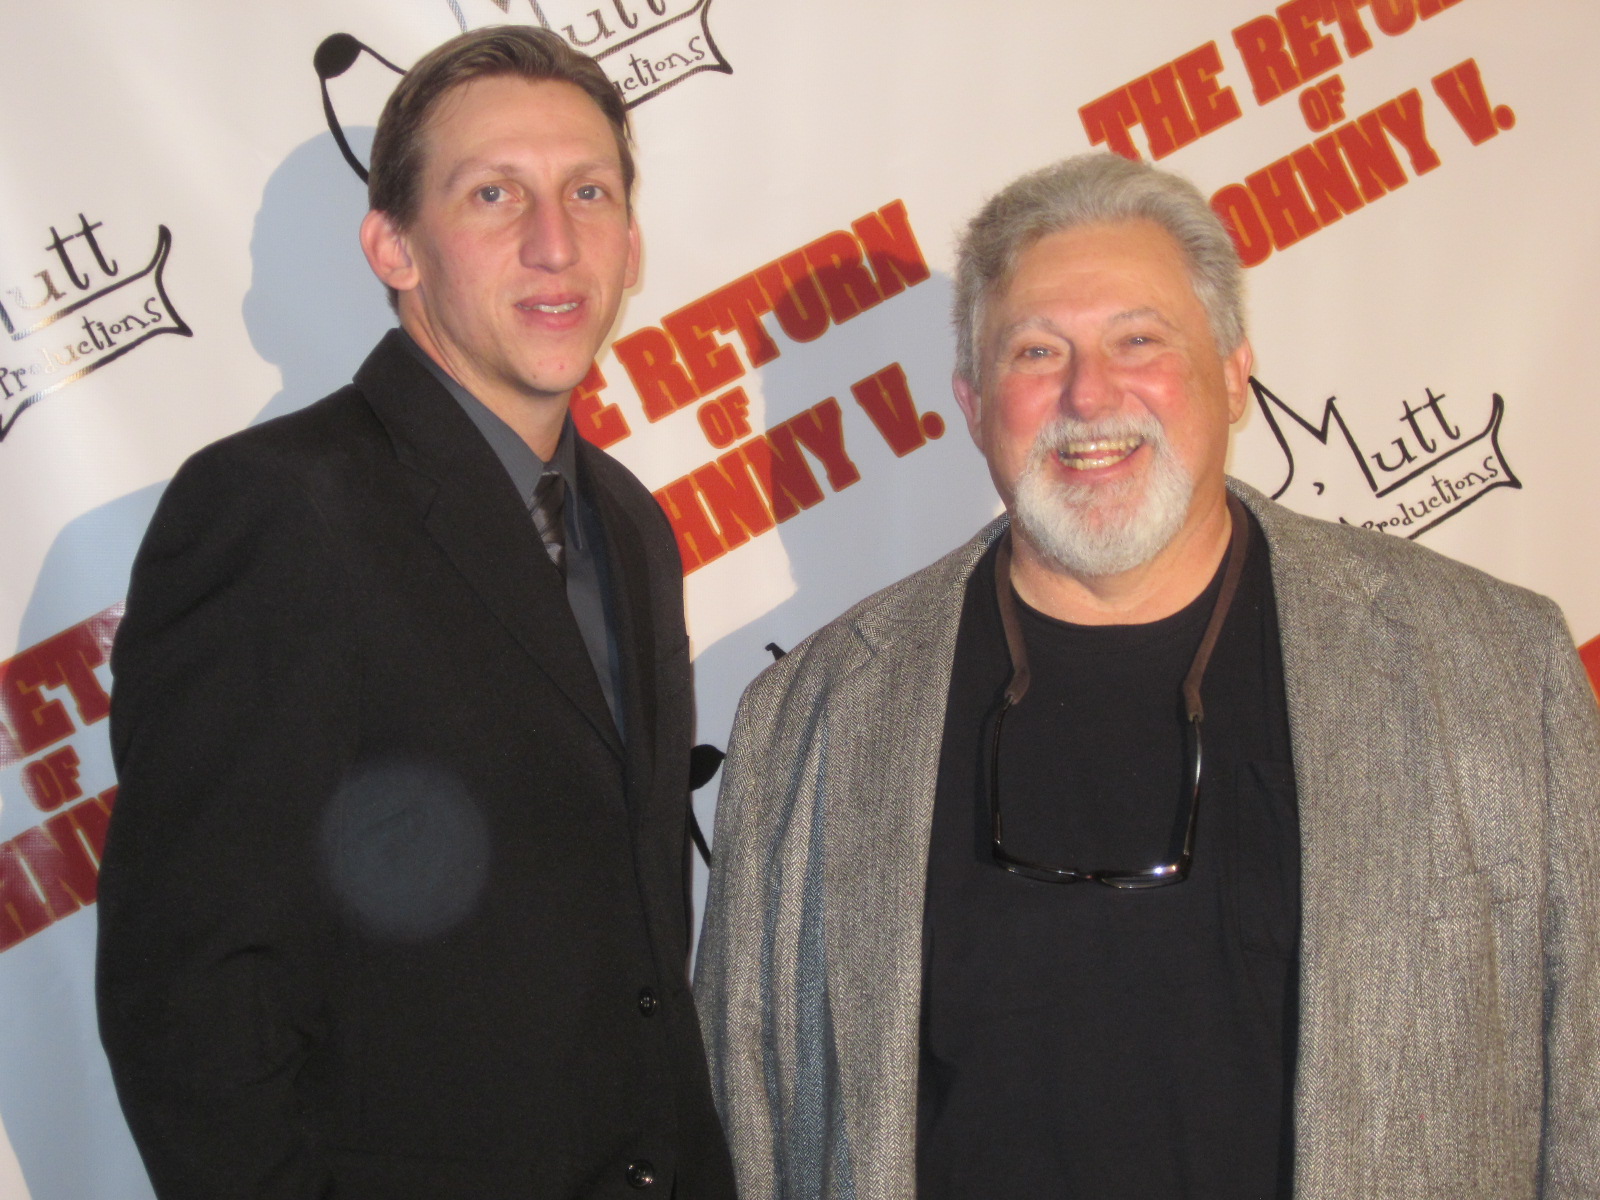 John William Young with his son, director Ryan Young at the premier of his feature film THE RETURN OF JOHNNY V